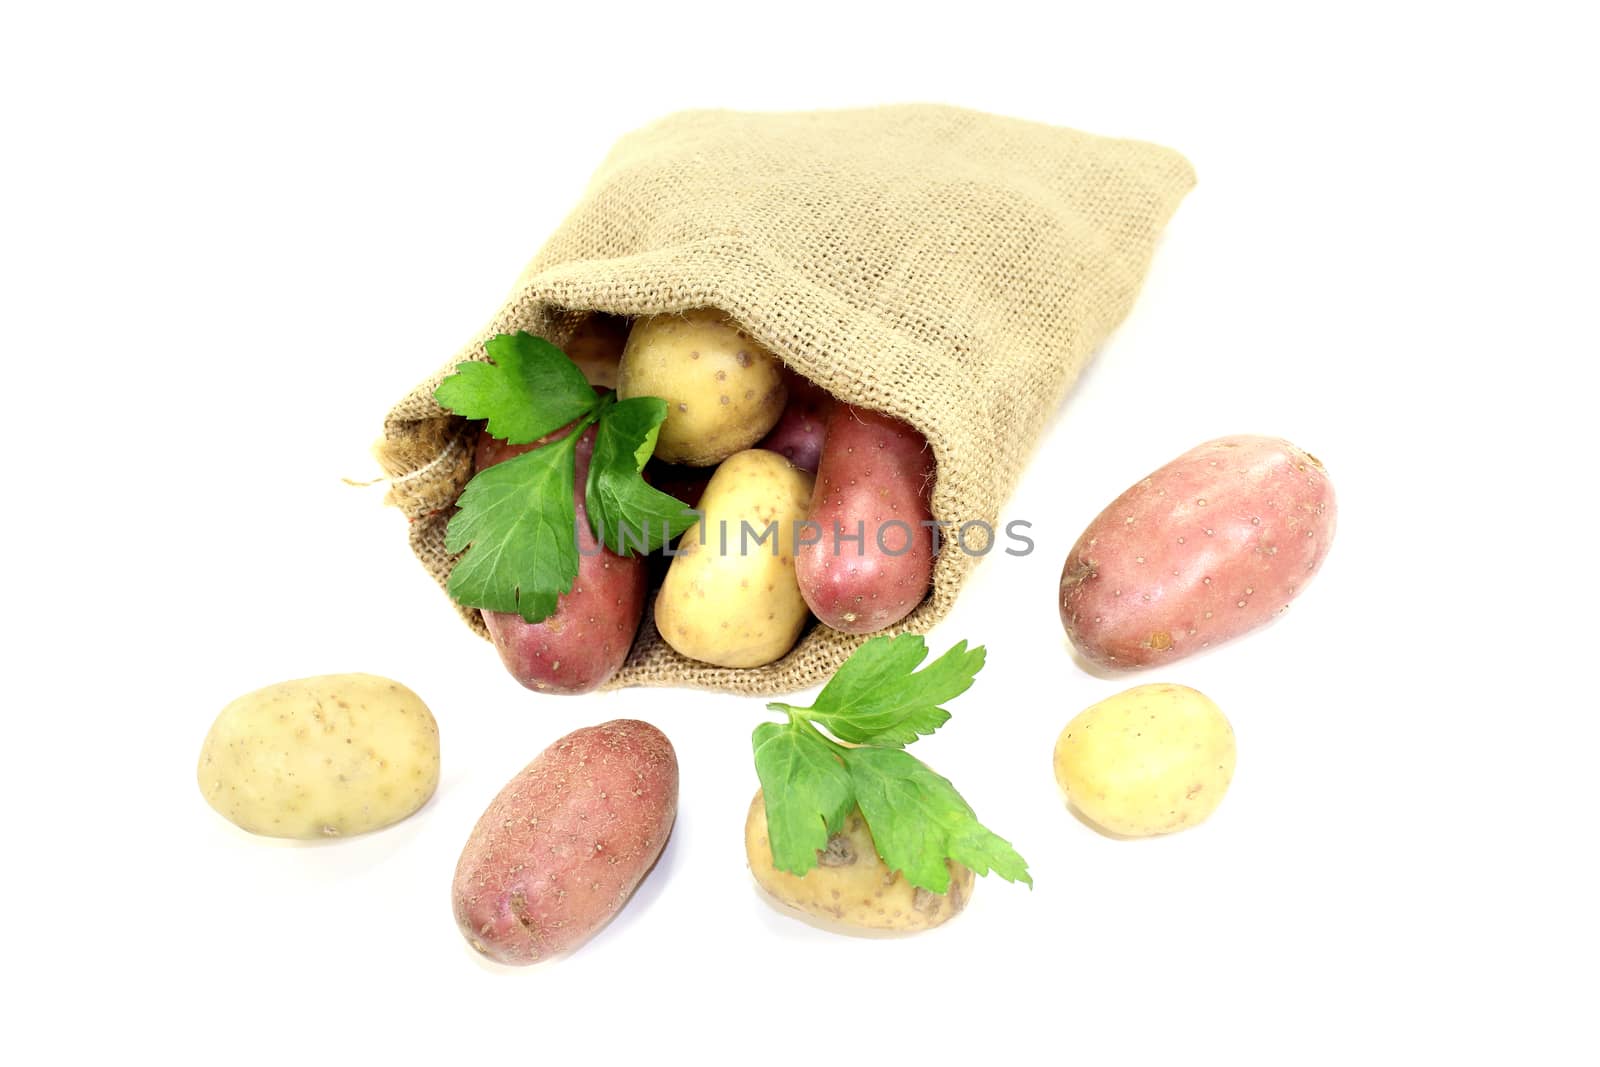 colorful potatoes in jute sack by discovery